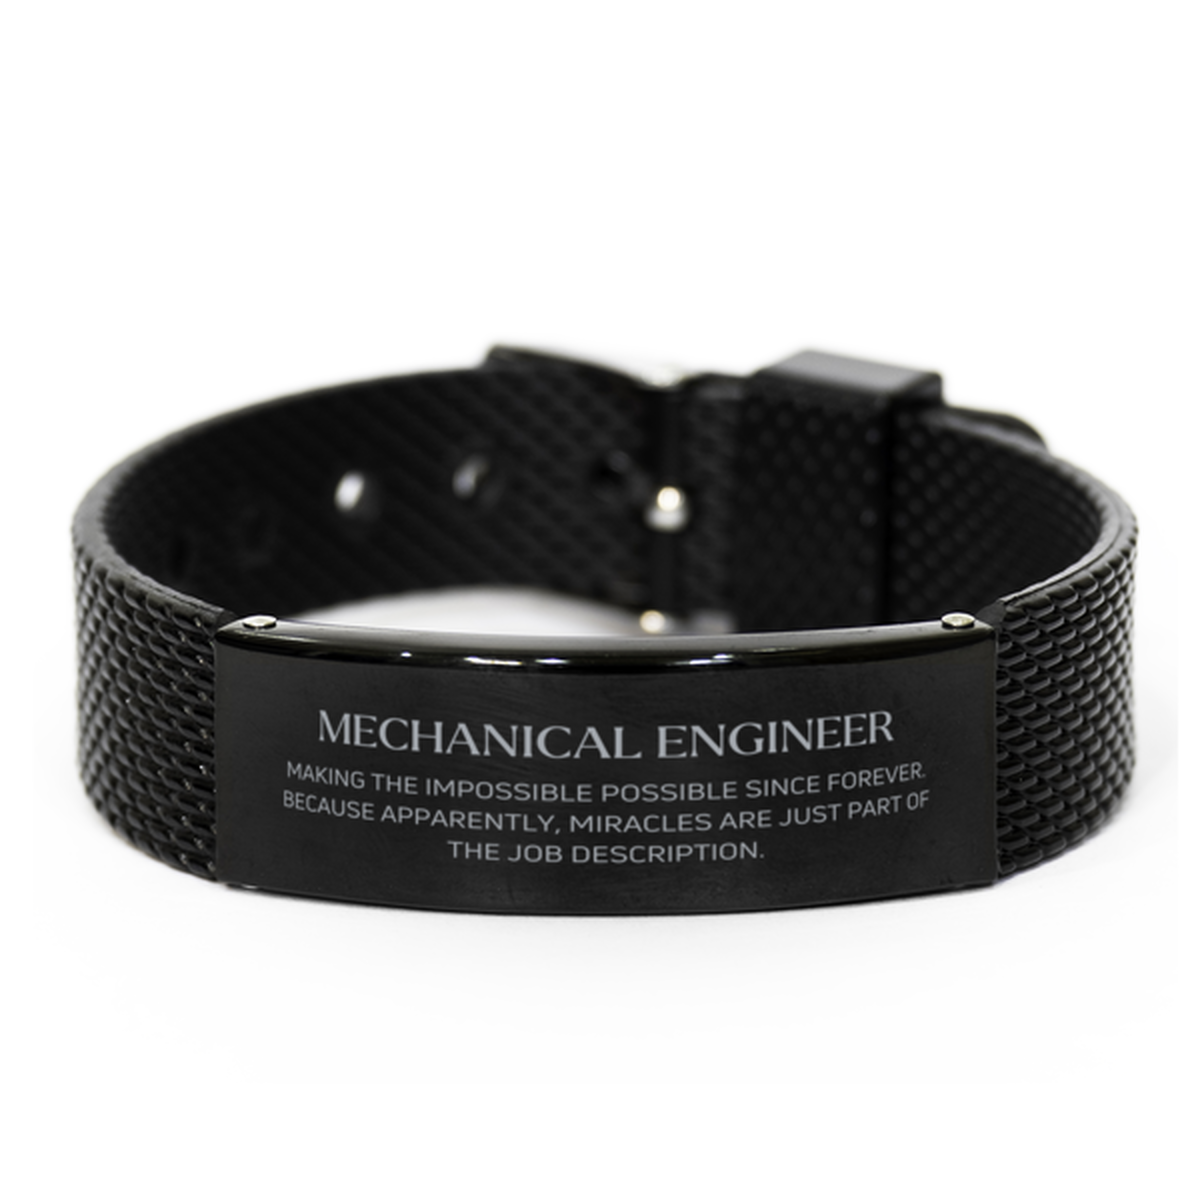 Funny Mechanical Engineer Gifts, Miracles are just part of the job description, Inspirational Birthday Black Shark Mesh Bracelet For Mechanical Engineer, Men, Women, Coworkers, Friends, Boss